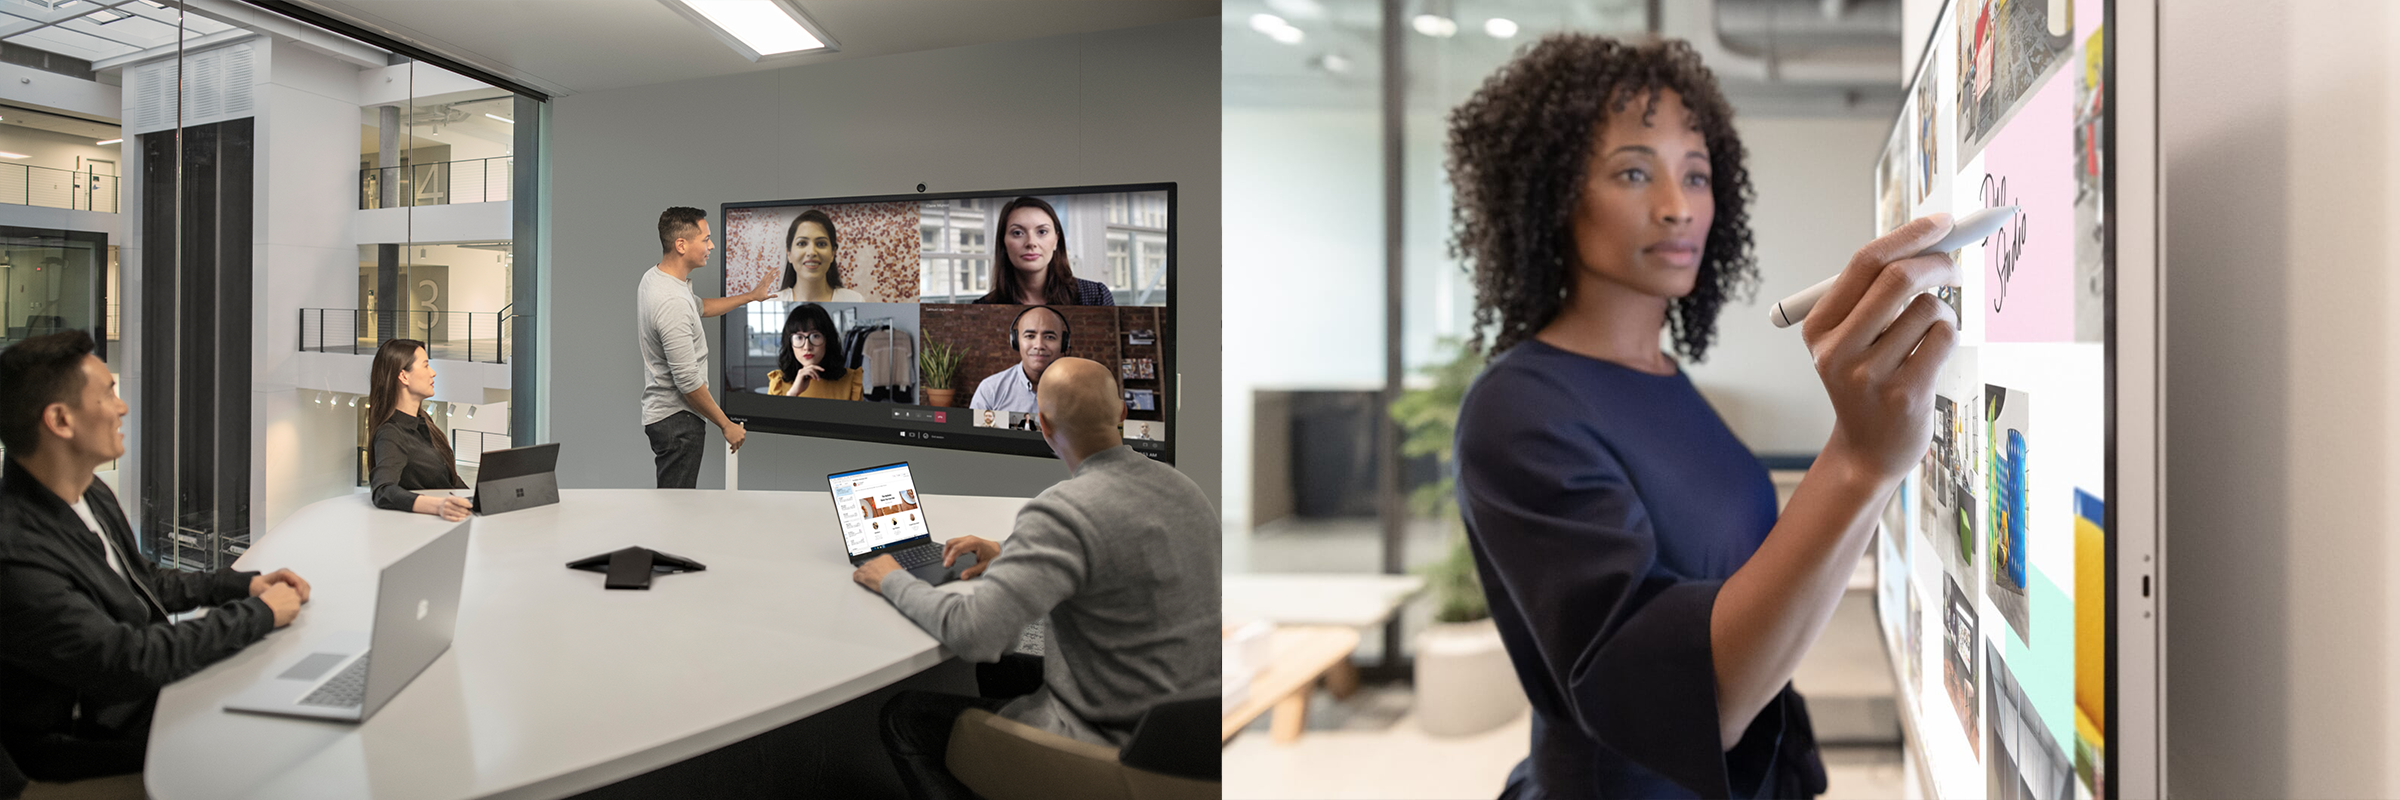 Two images show the Surface Hub in use. One in a meeting room, the other in detail.